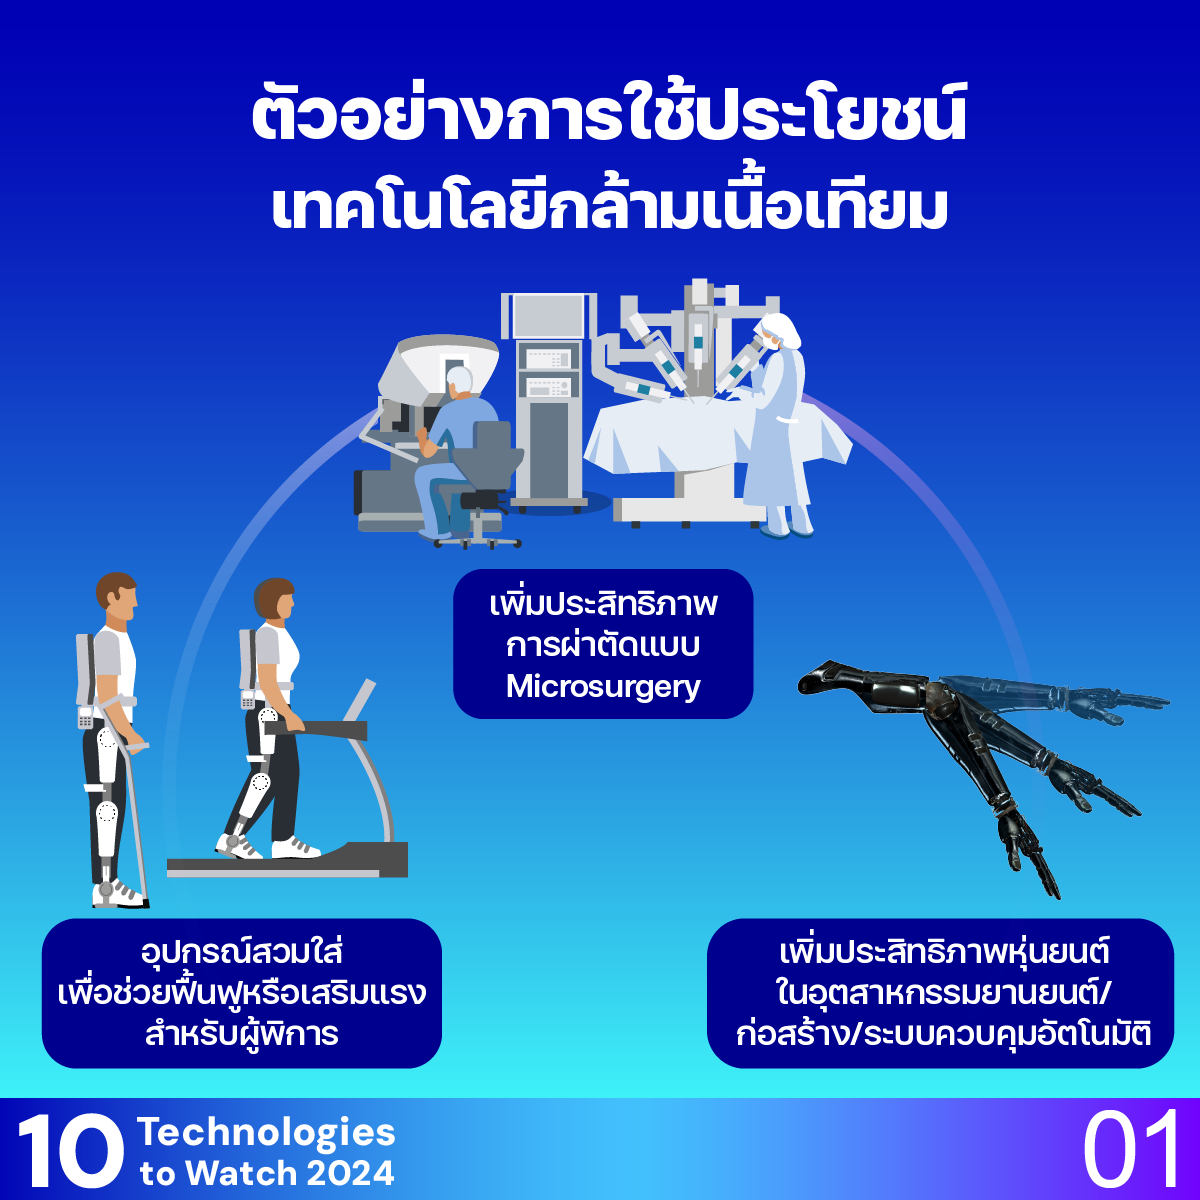 10 Technologies to Watch 2024: กล้ามเนื้อเทียม (Artificial Muscle)